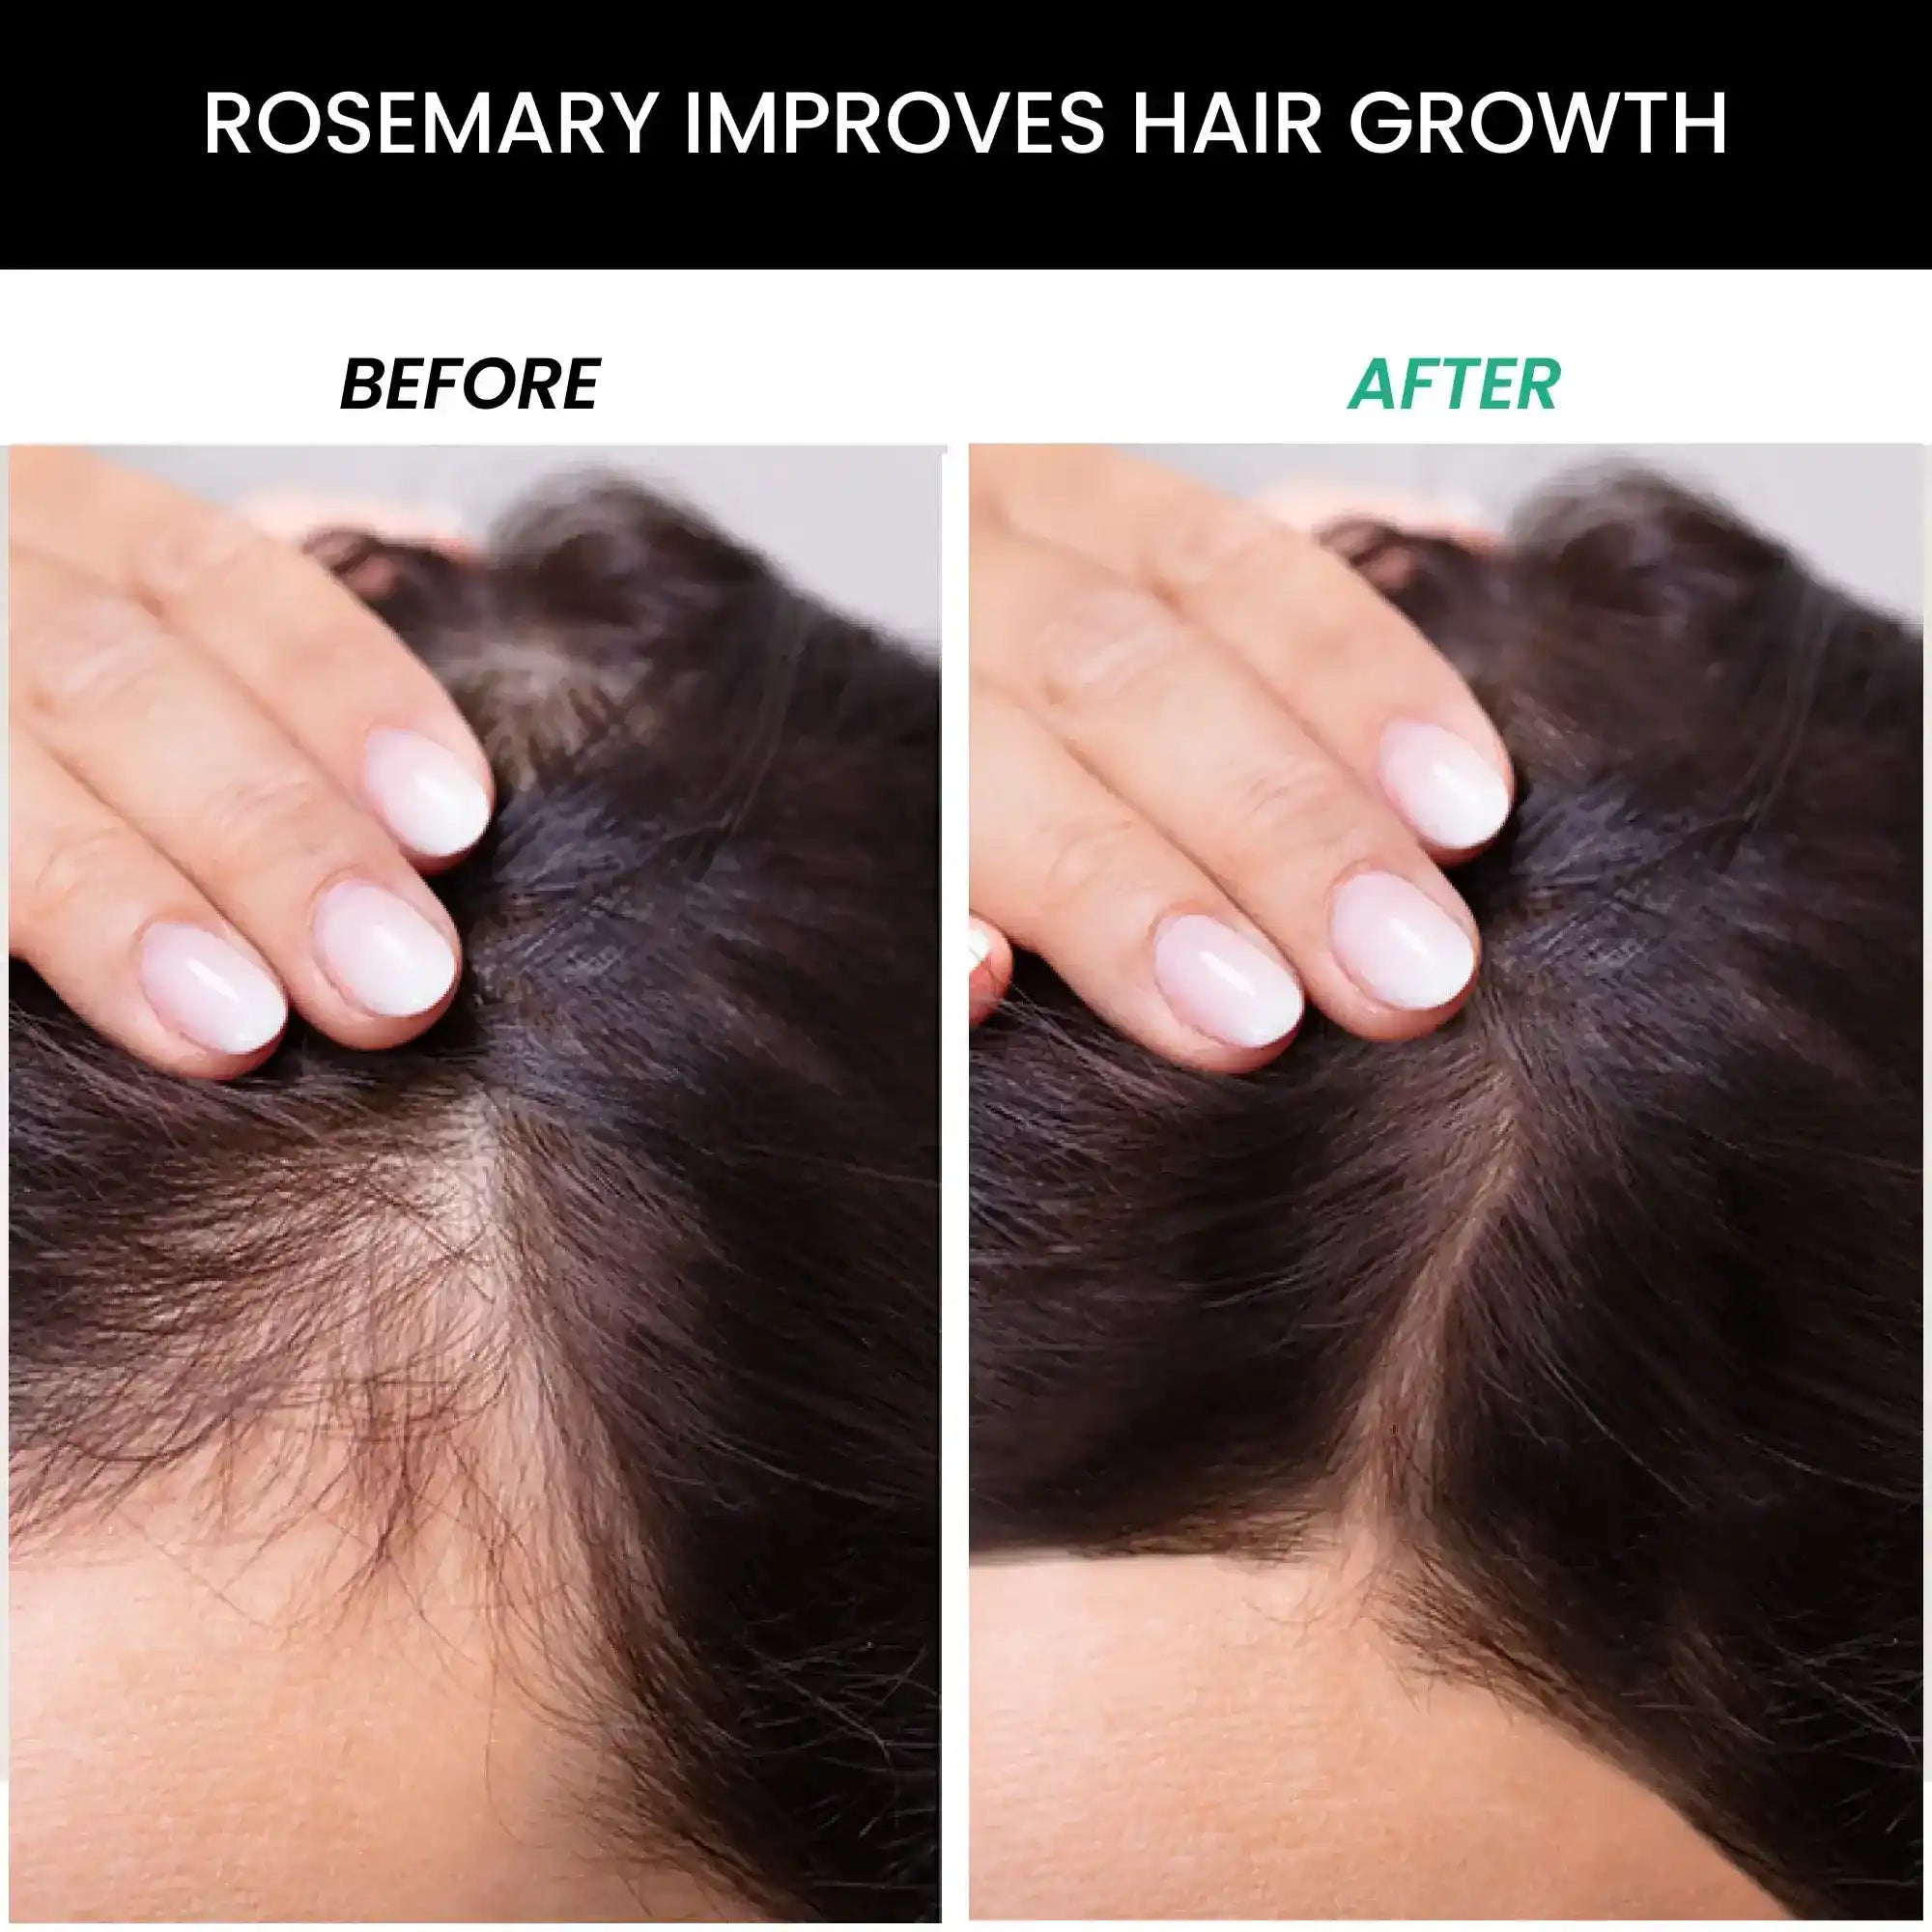 before and after using rosemary hair conditioner